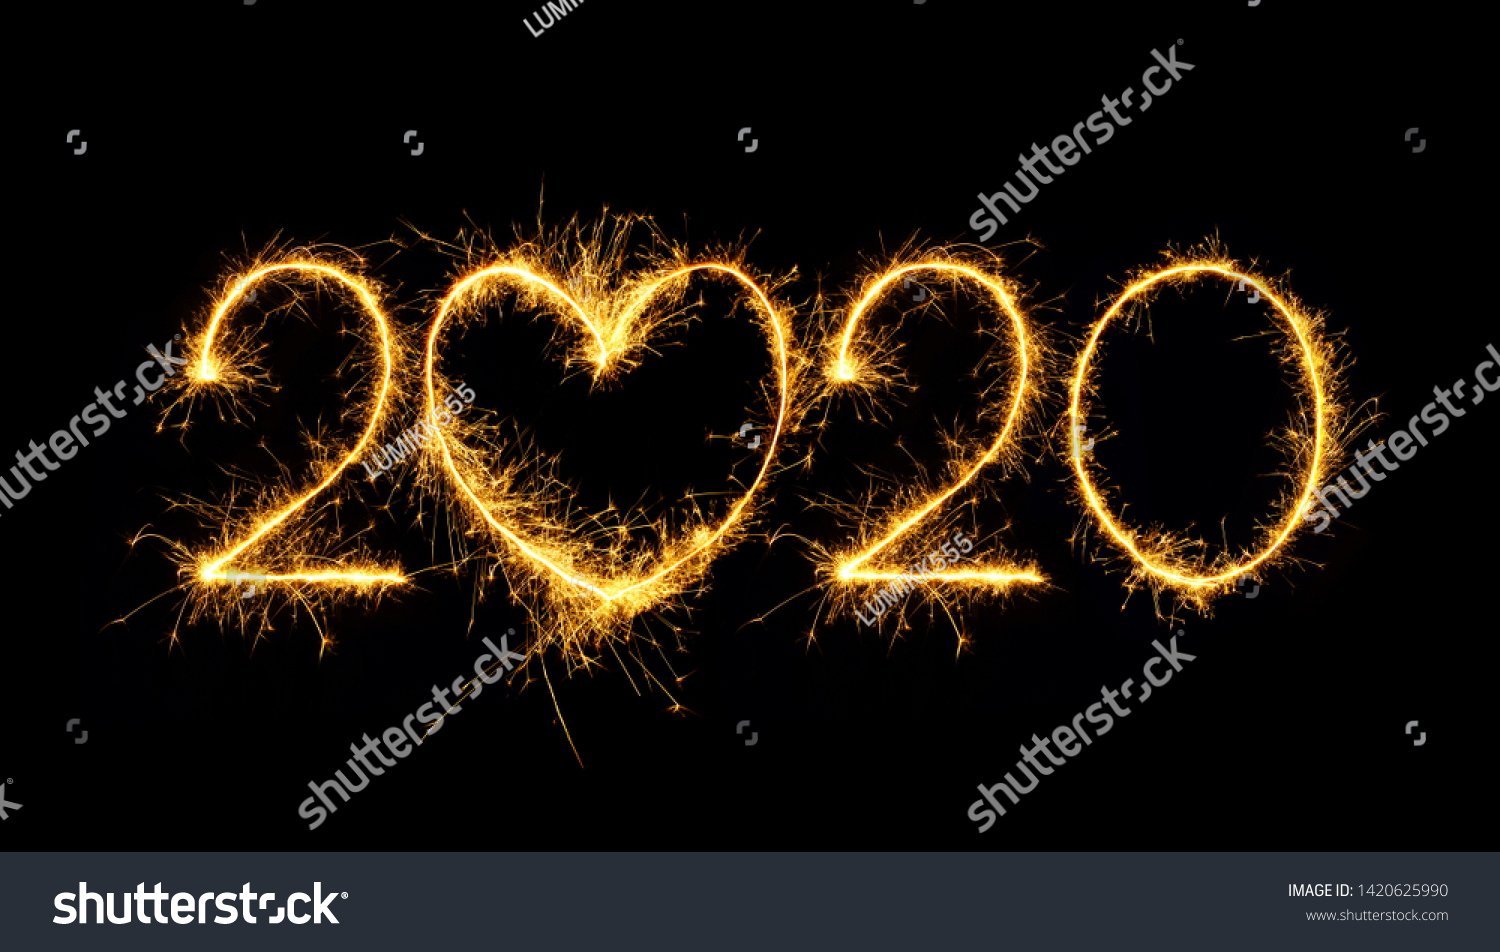 Happy New Year 2020. Creative Number 2020 with sign heart written sparkling sparklers isolated on black background for design. Beautiful Glowing overlay template for holiday greeting card. #1420625990